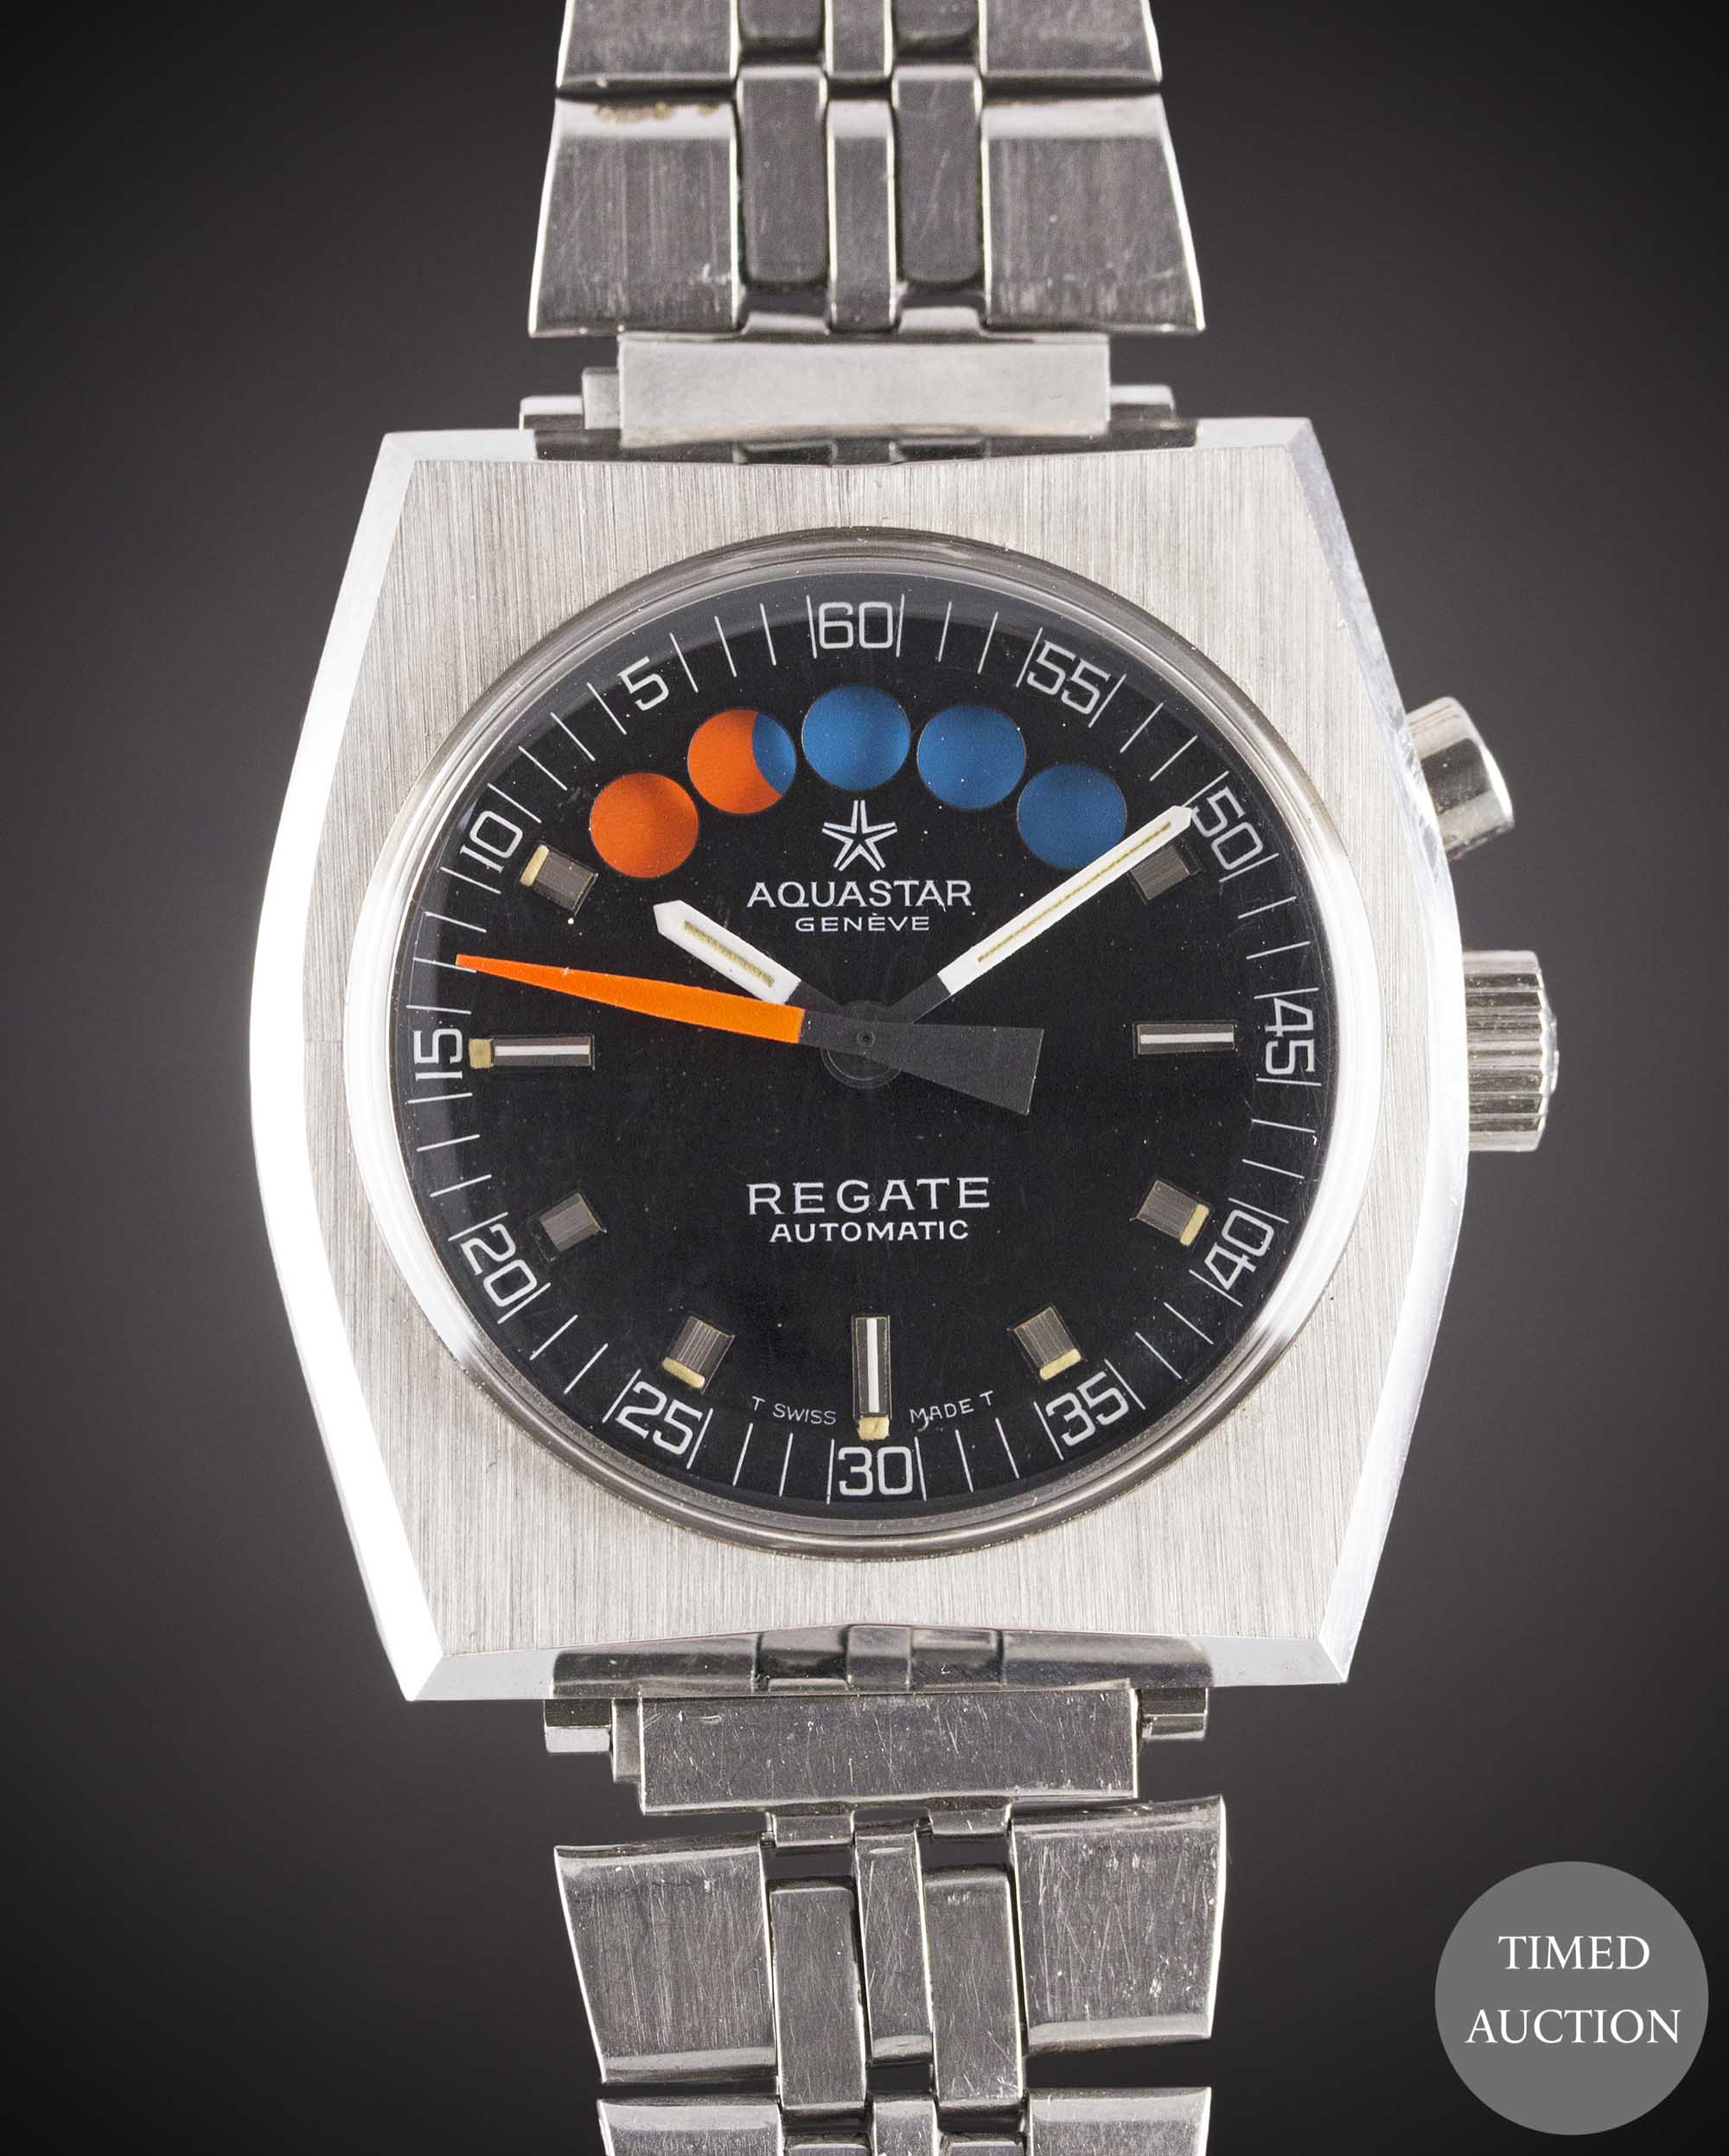 A GENTLEMAN'S STAINLESS STEEL AQUASTAR REGATE AUTOMATIC YACHTING BRACELET WATCH CIRCA 1970s, WITH